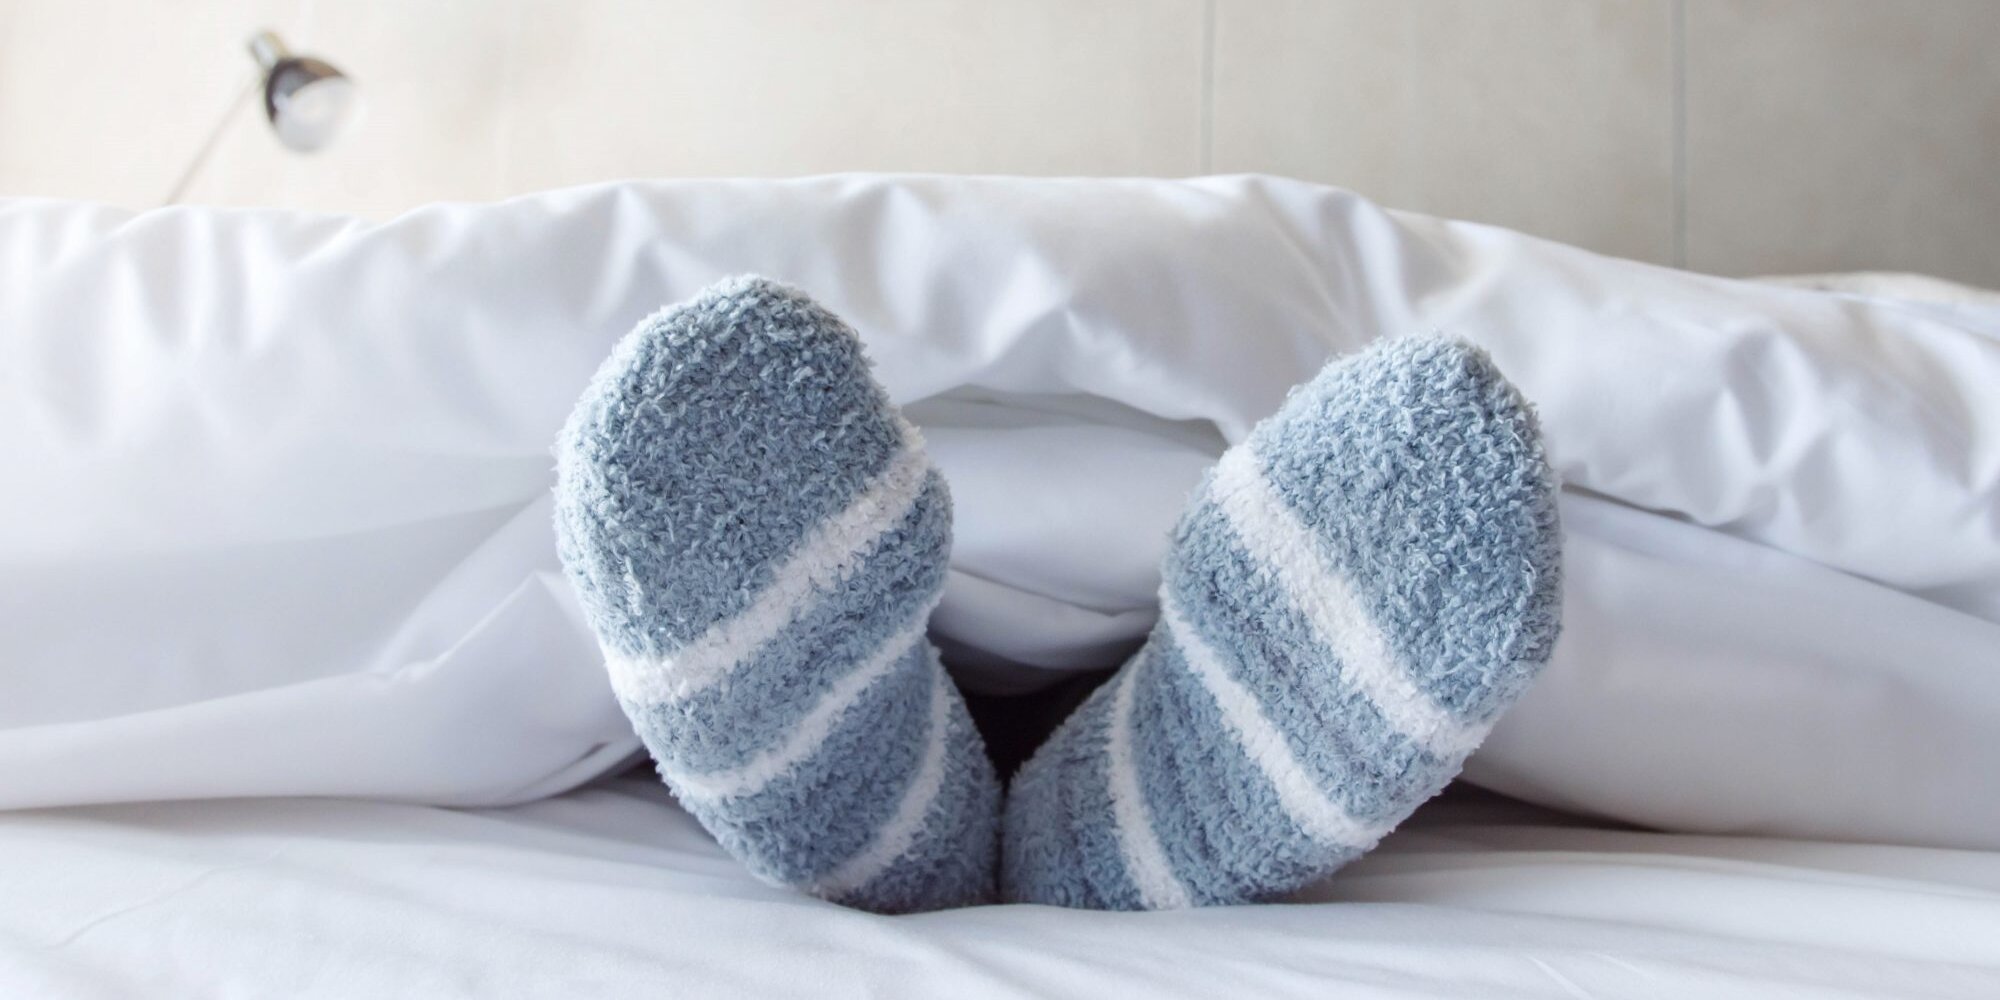 Wearing socks while sleeping.. What are the benefits and harms